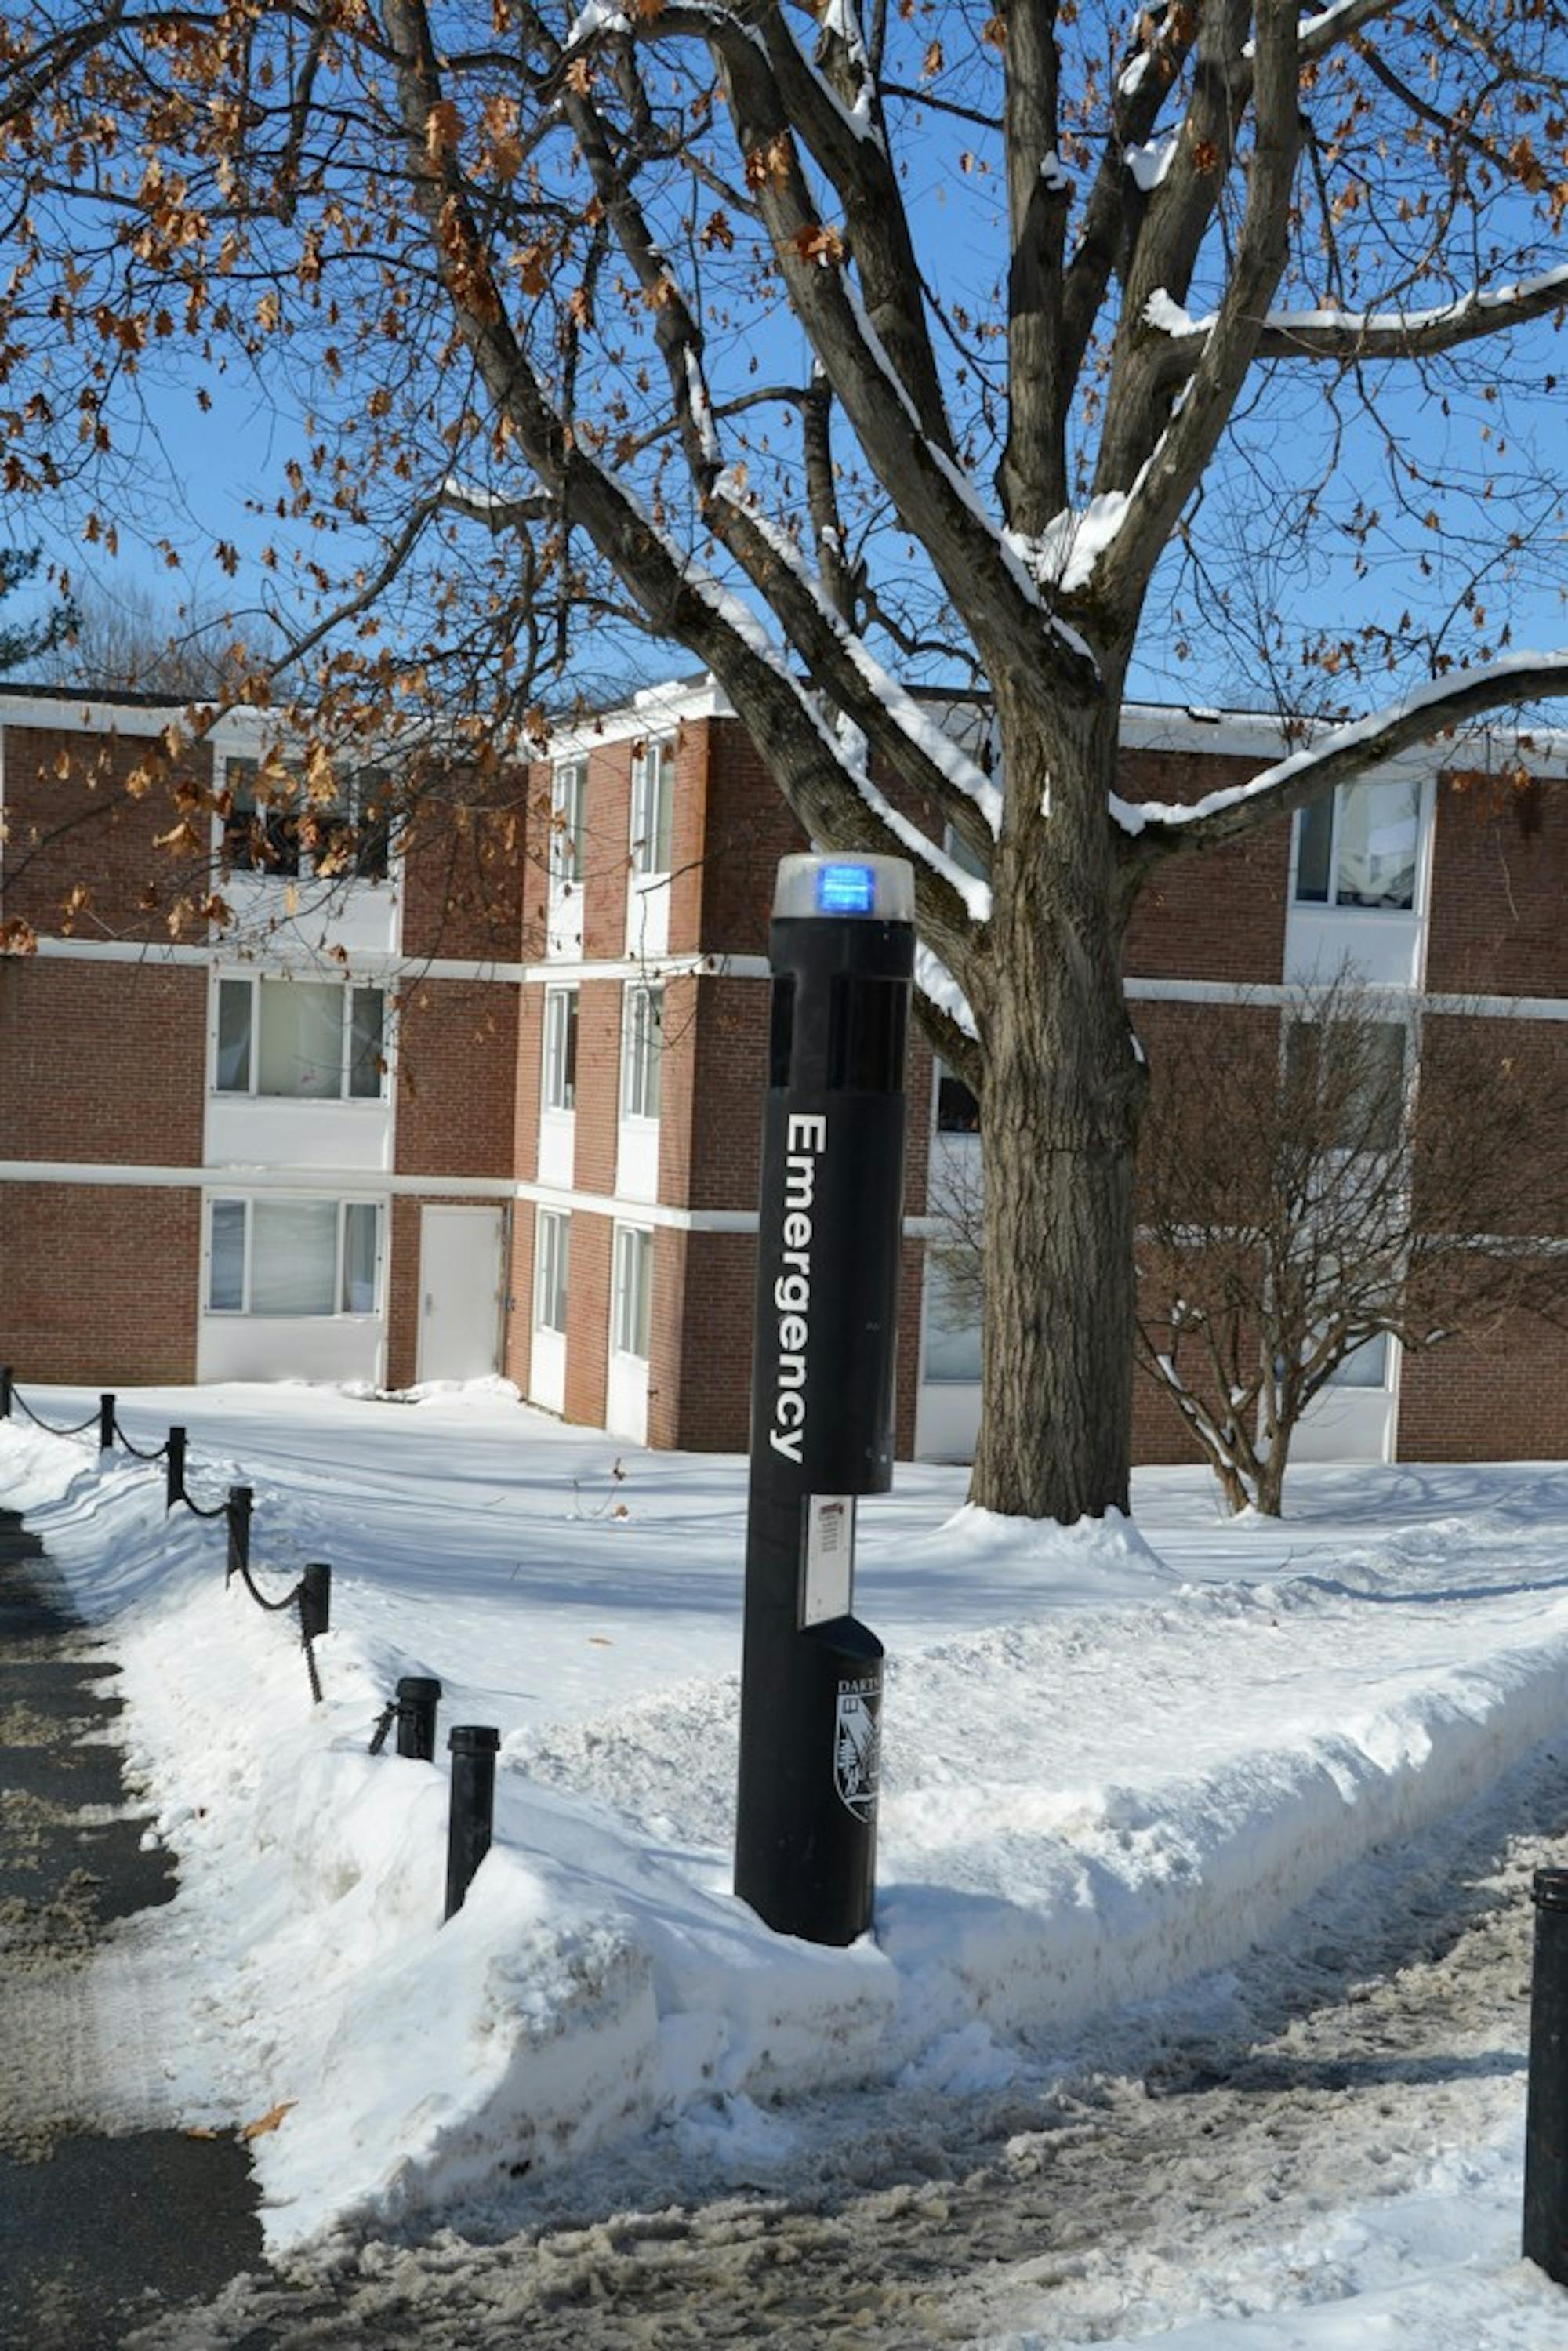 Blue Light System stations are positioned throughout campus and summon assistance when the button is pressed.